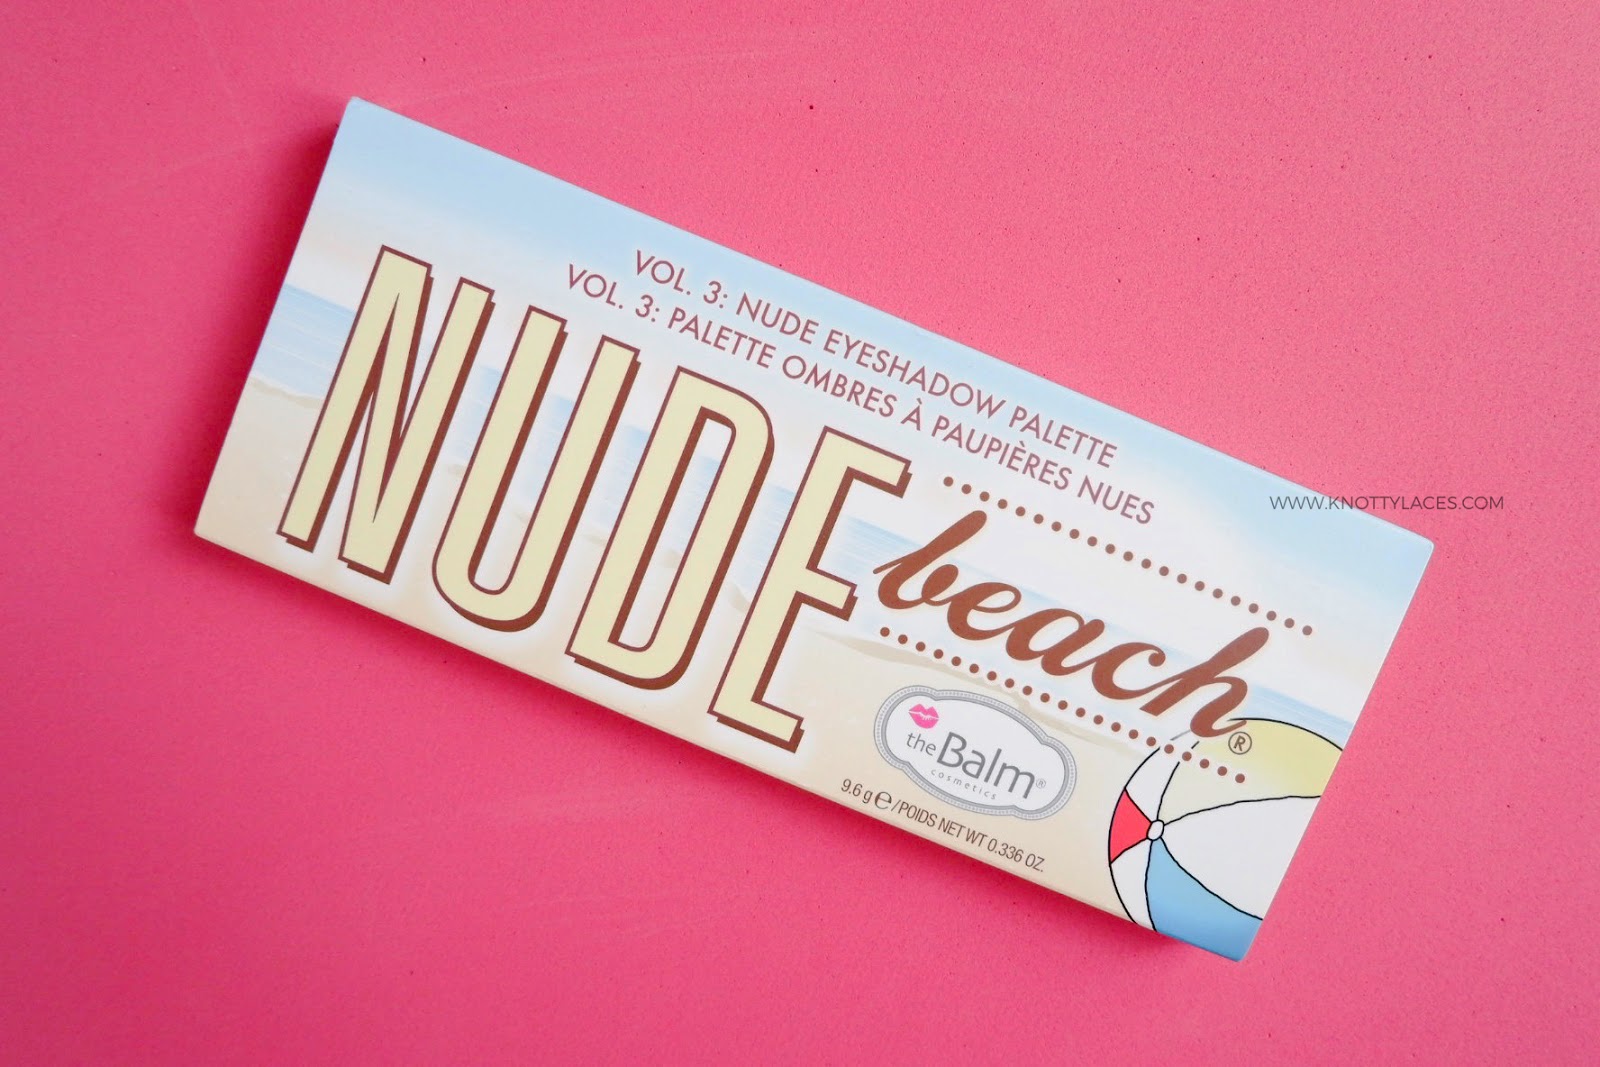 theBalm Nude tude Eyeshadow Palette: Review and Swatches